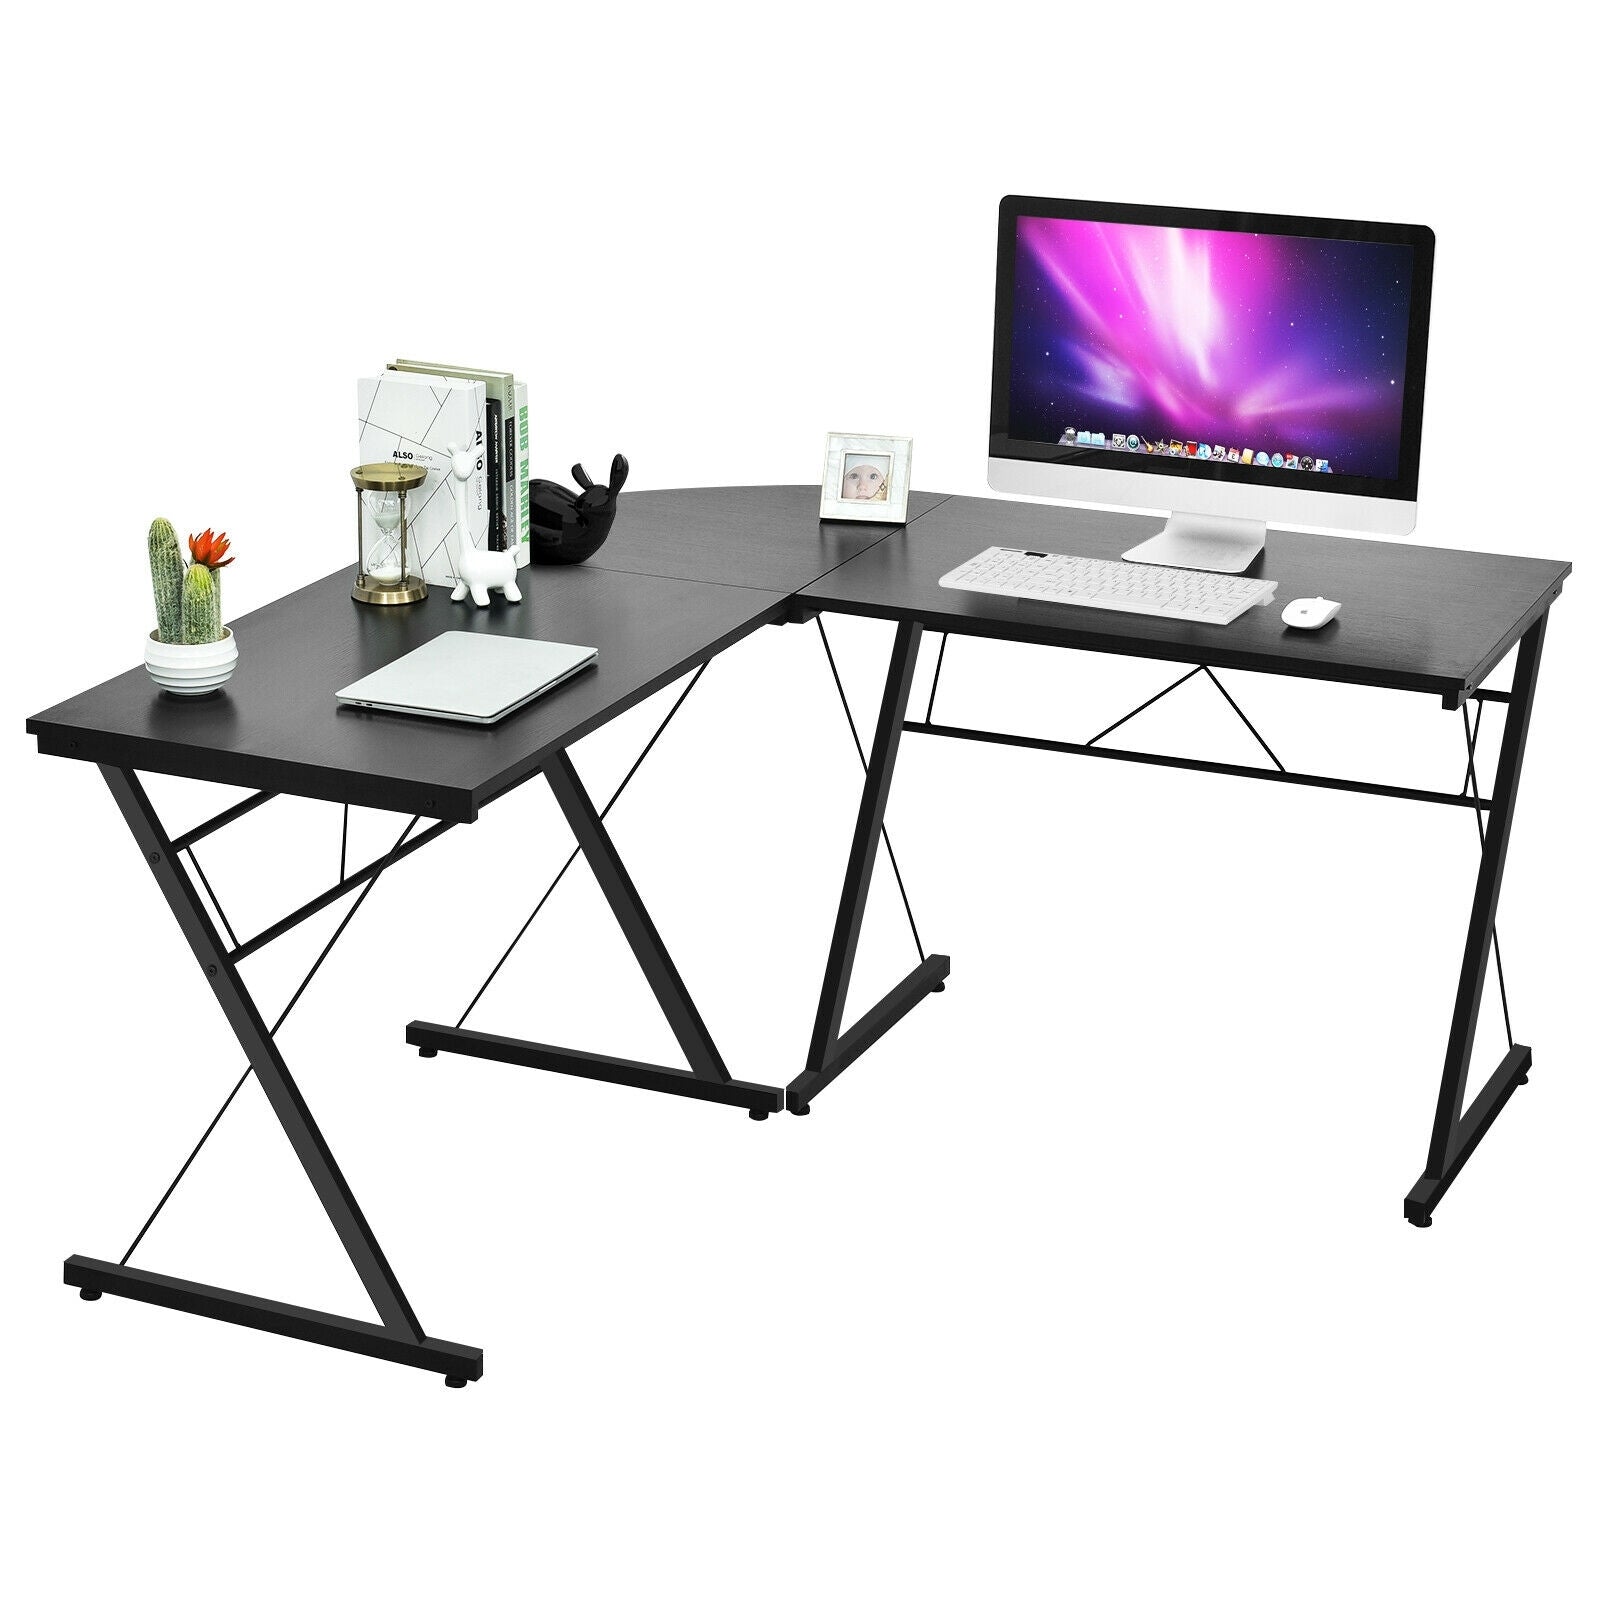 59 Inches L-Shaped Corner Desk Computer Table for Home Office Study Wo